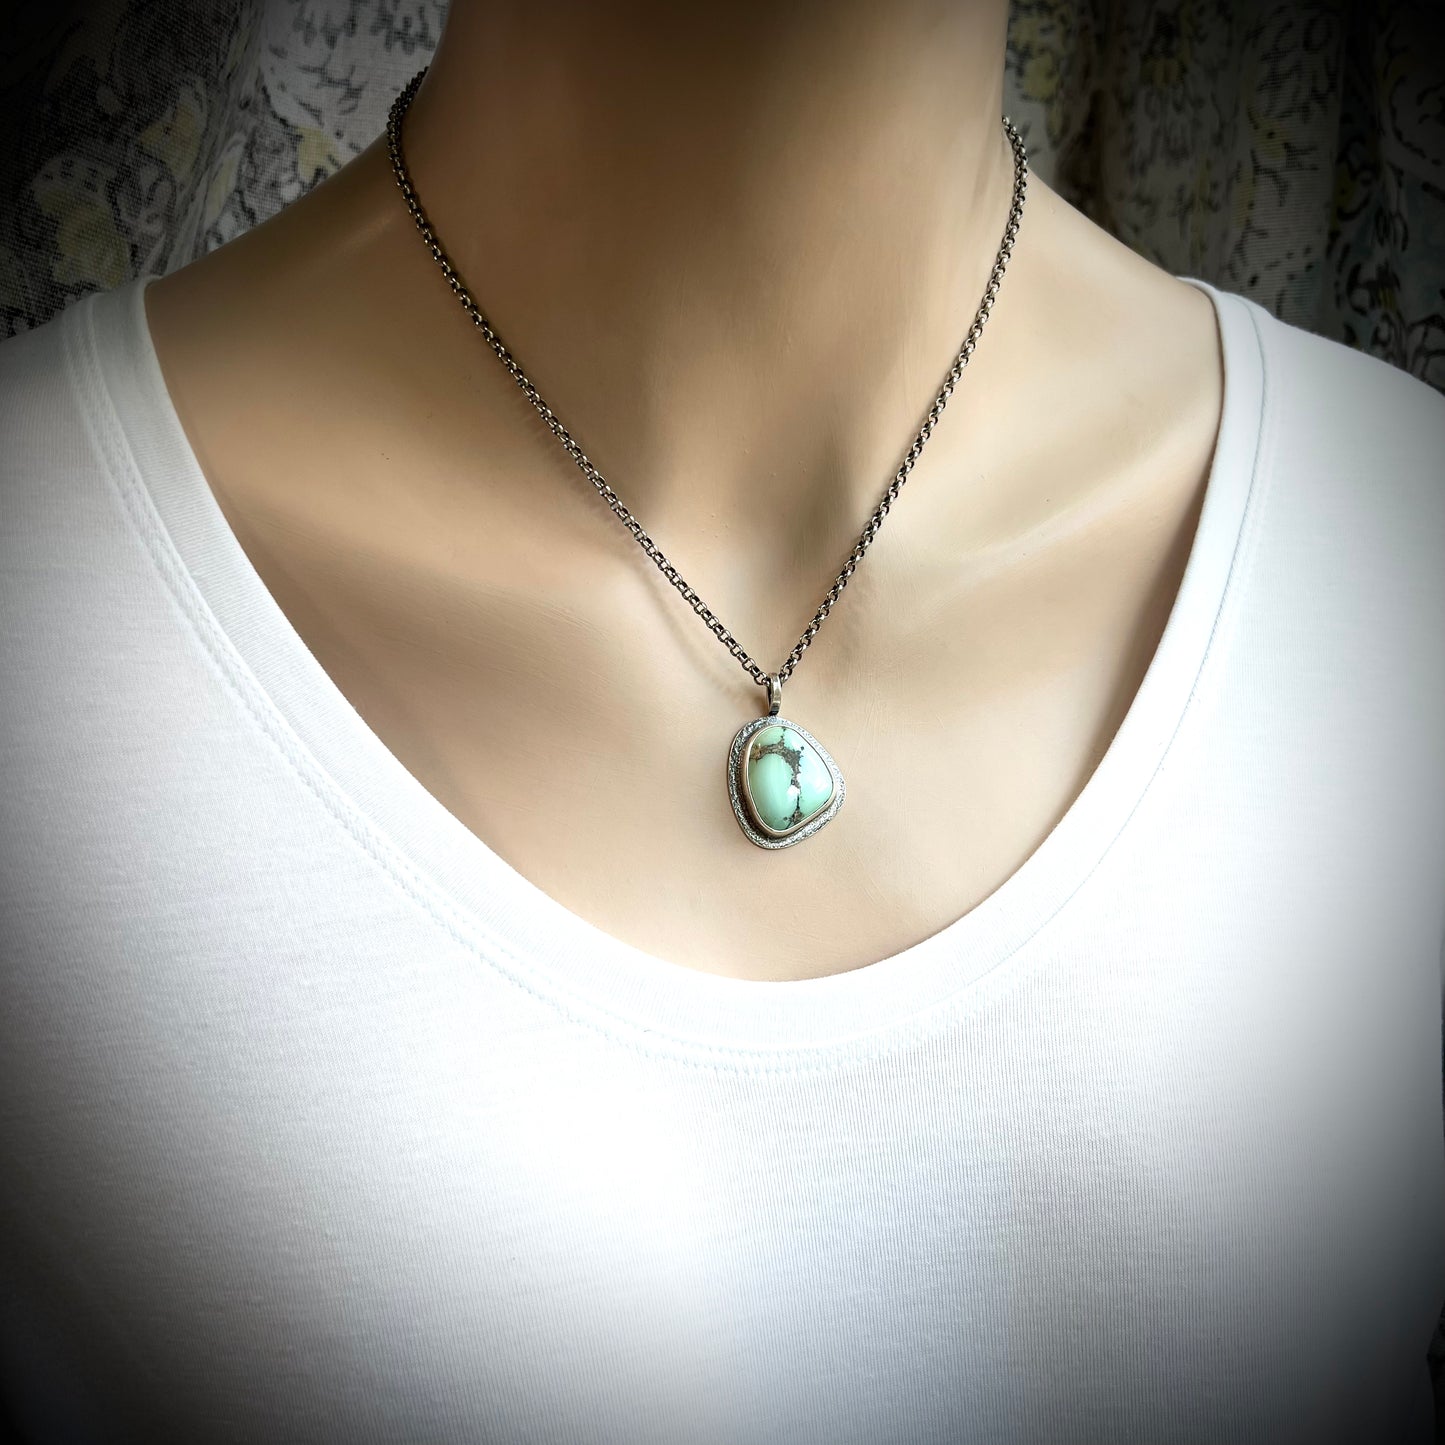 Sterling Silver Turquoise Freeform Necklace - One-of-a-Kind Turquoise Pendant on Sterling Silver Chain